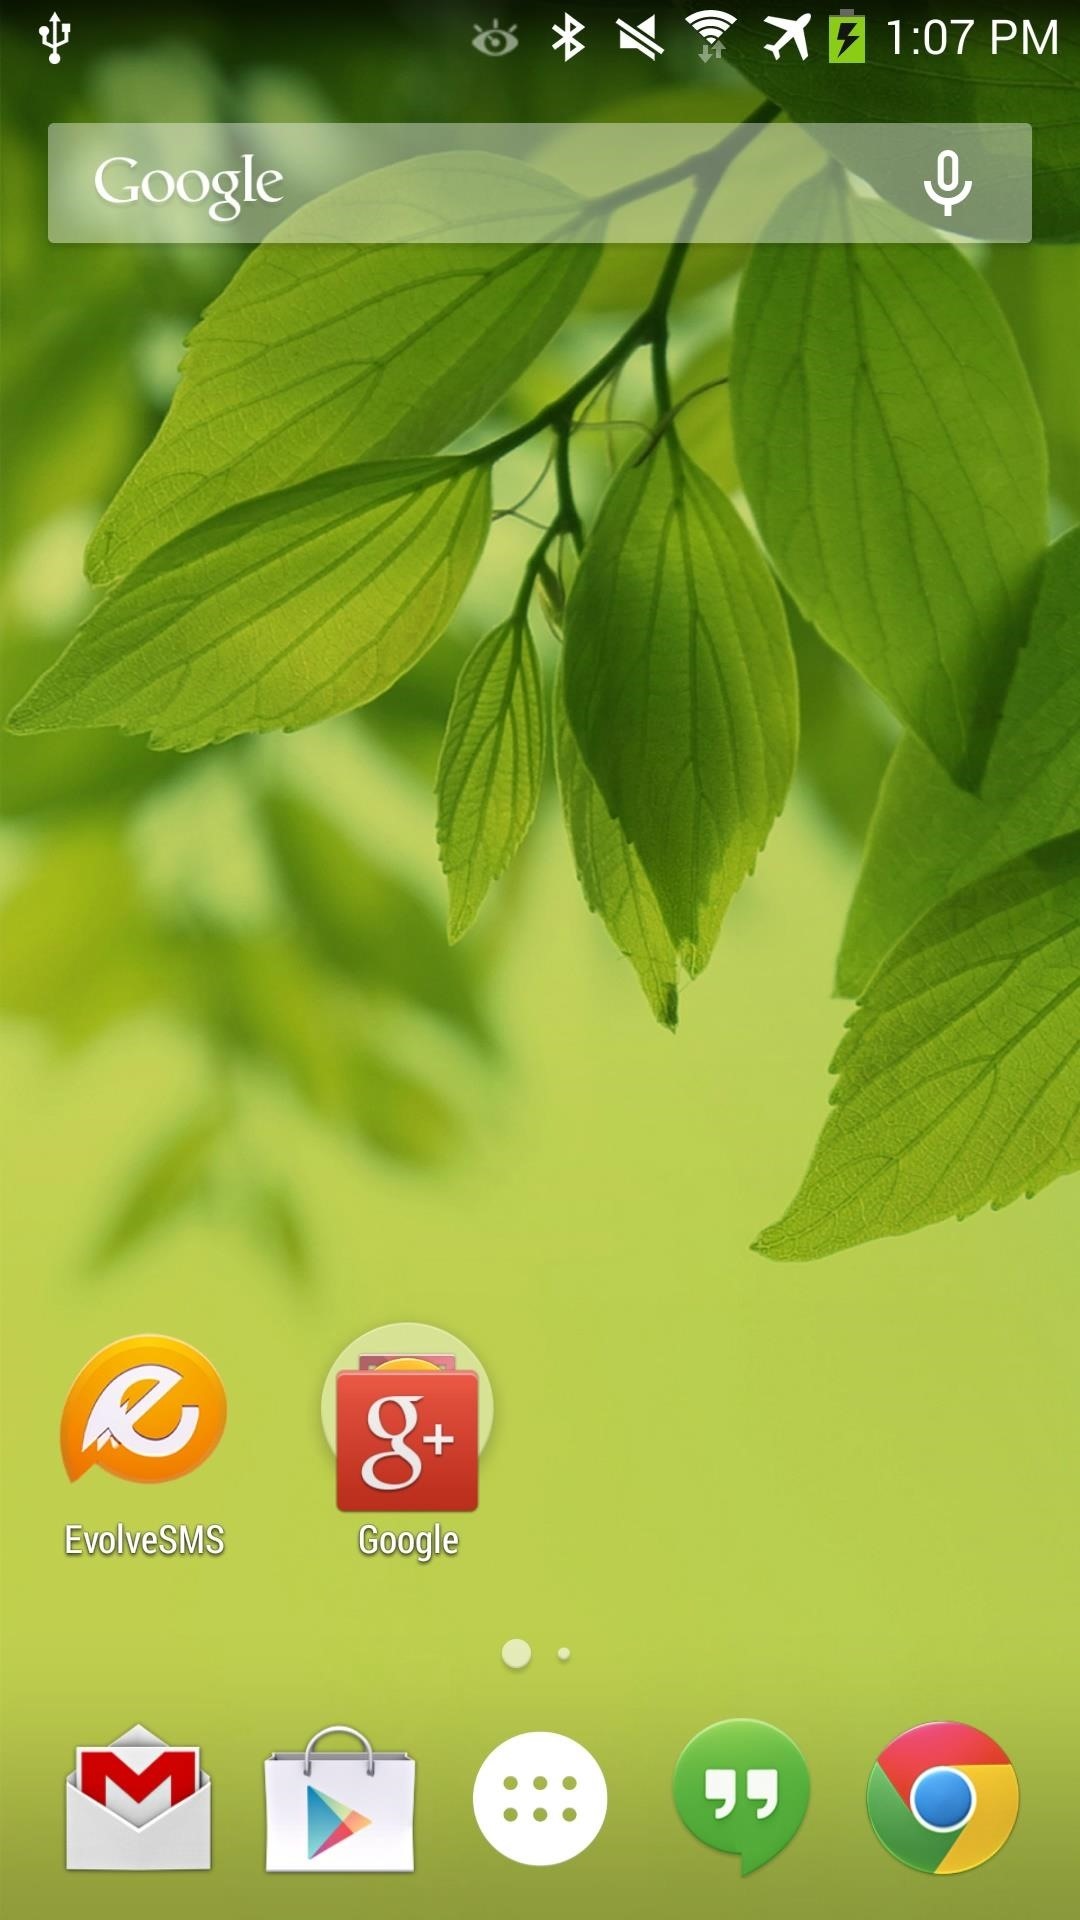 Turn Apps into Home Screen Pages on Android